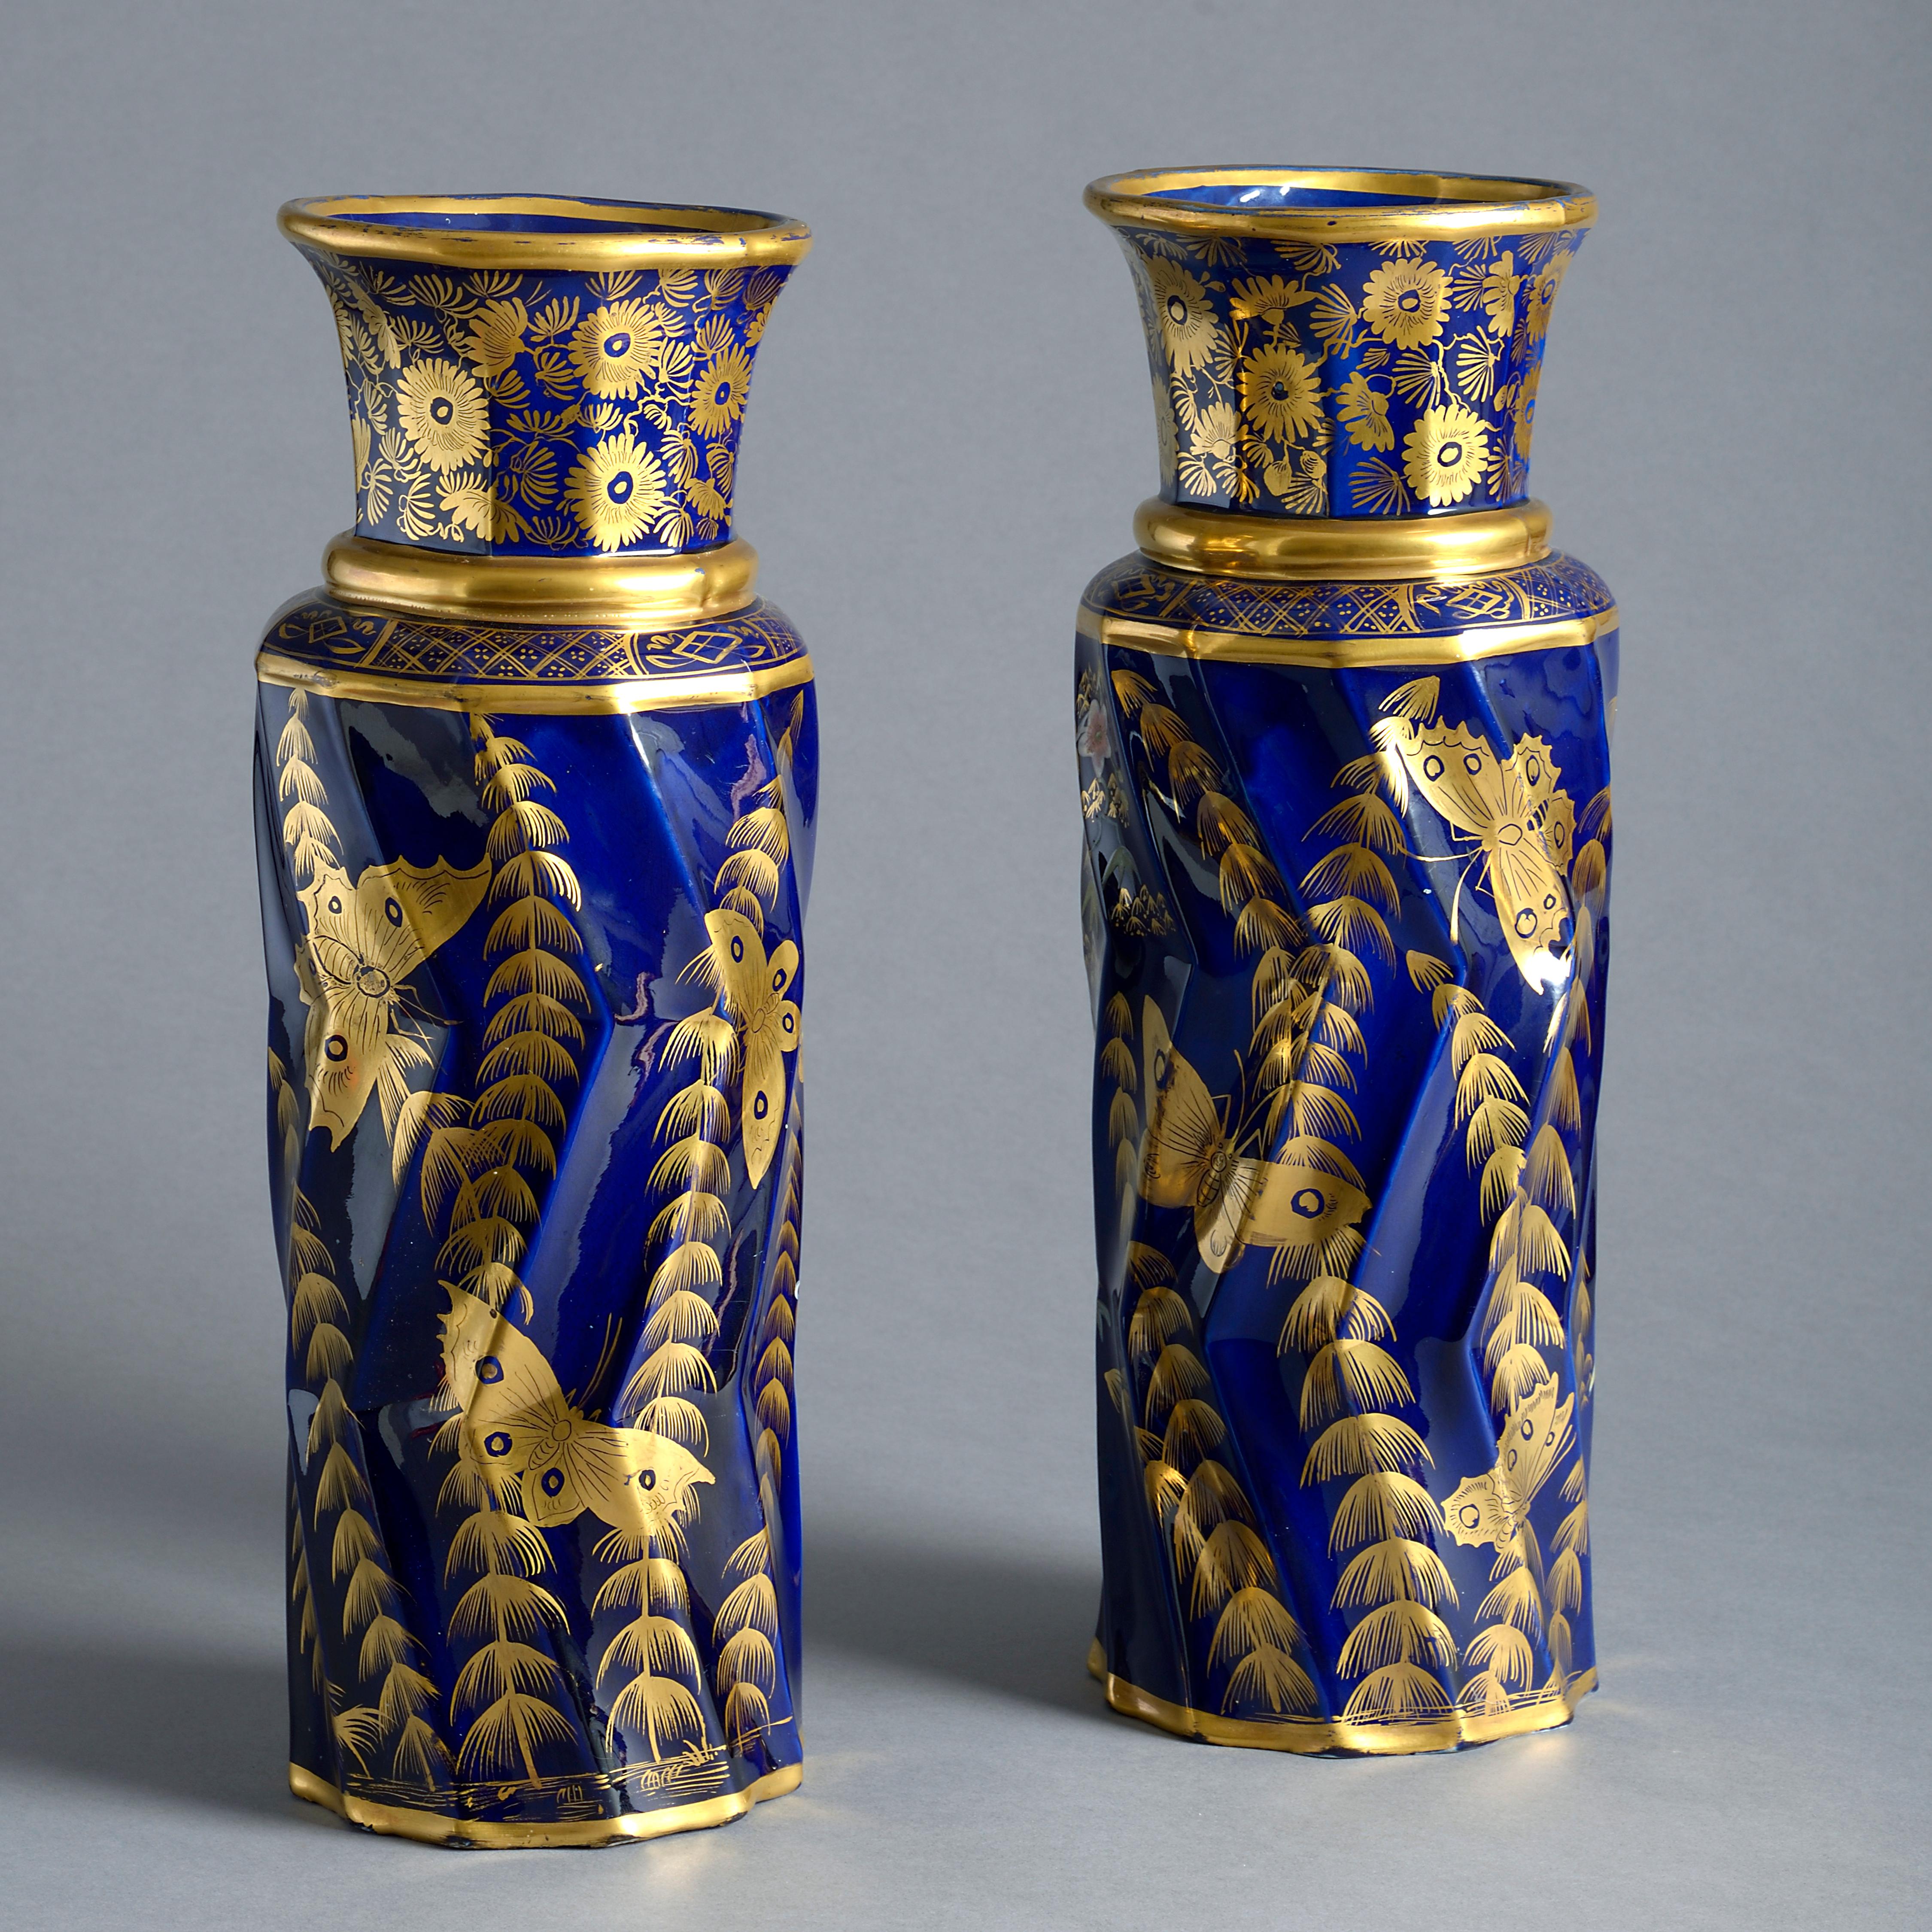 A fine pair of George IV Mason’s ironstone vases, circa 1825.

Decorated with pheasants among branches of blossom and butterflies among fern fronds.